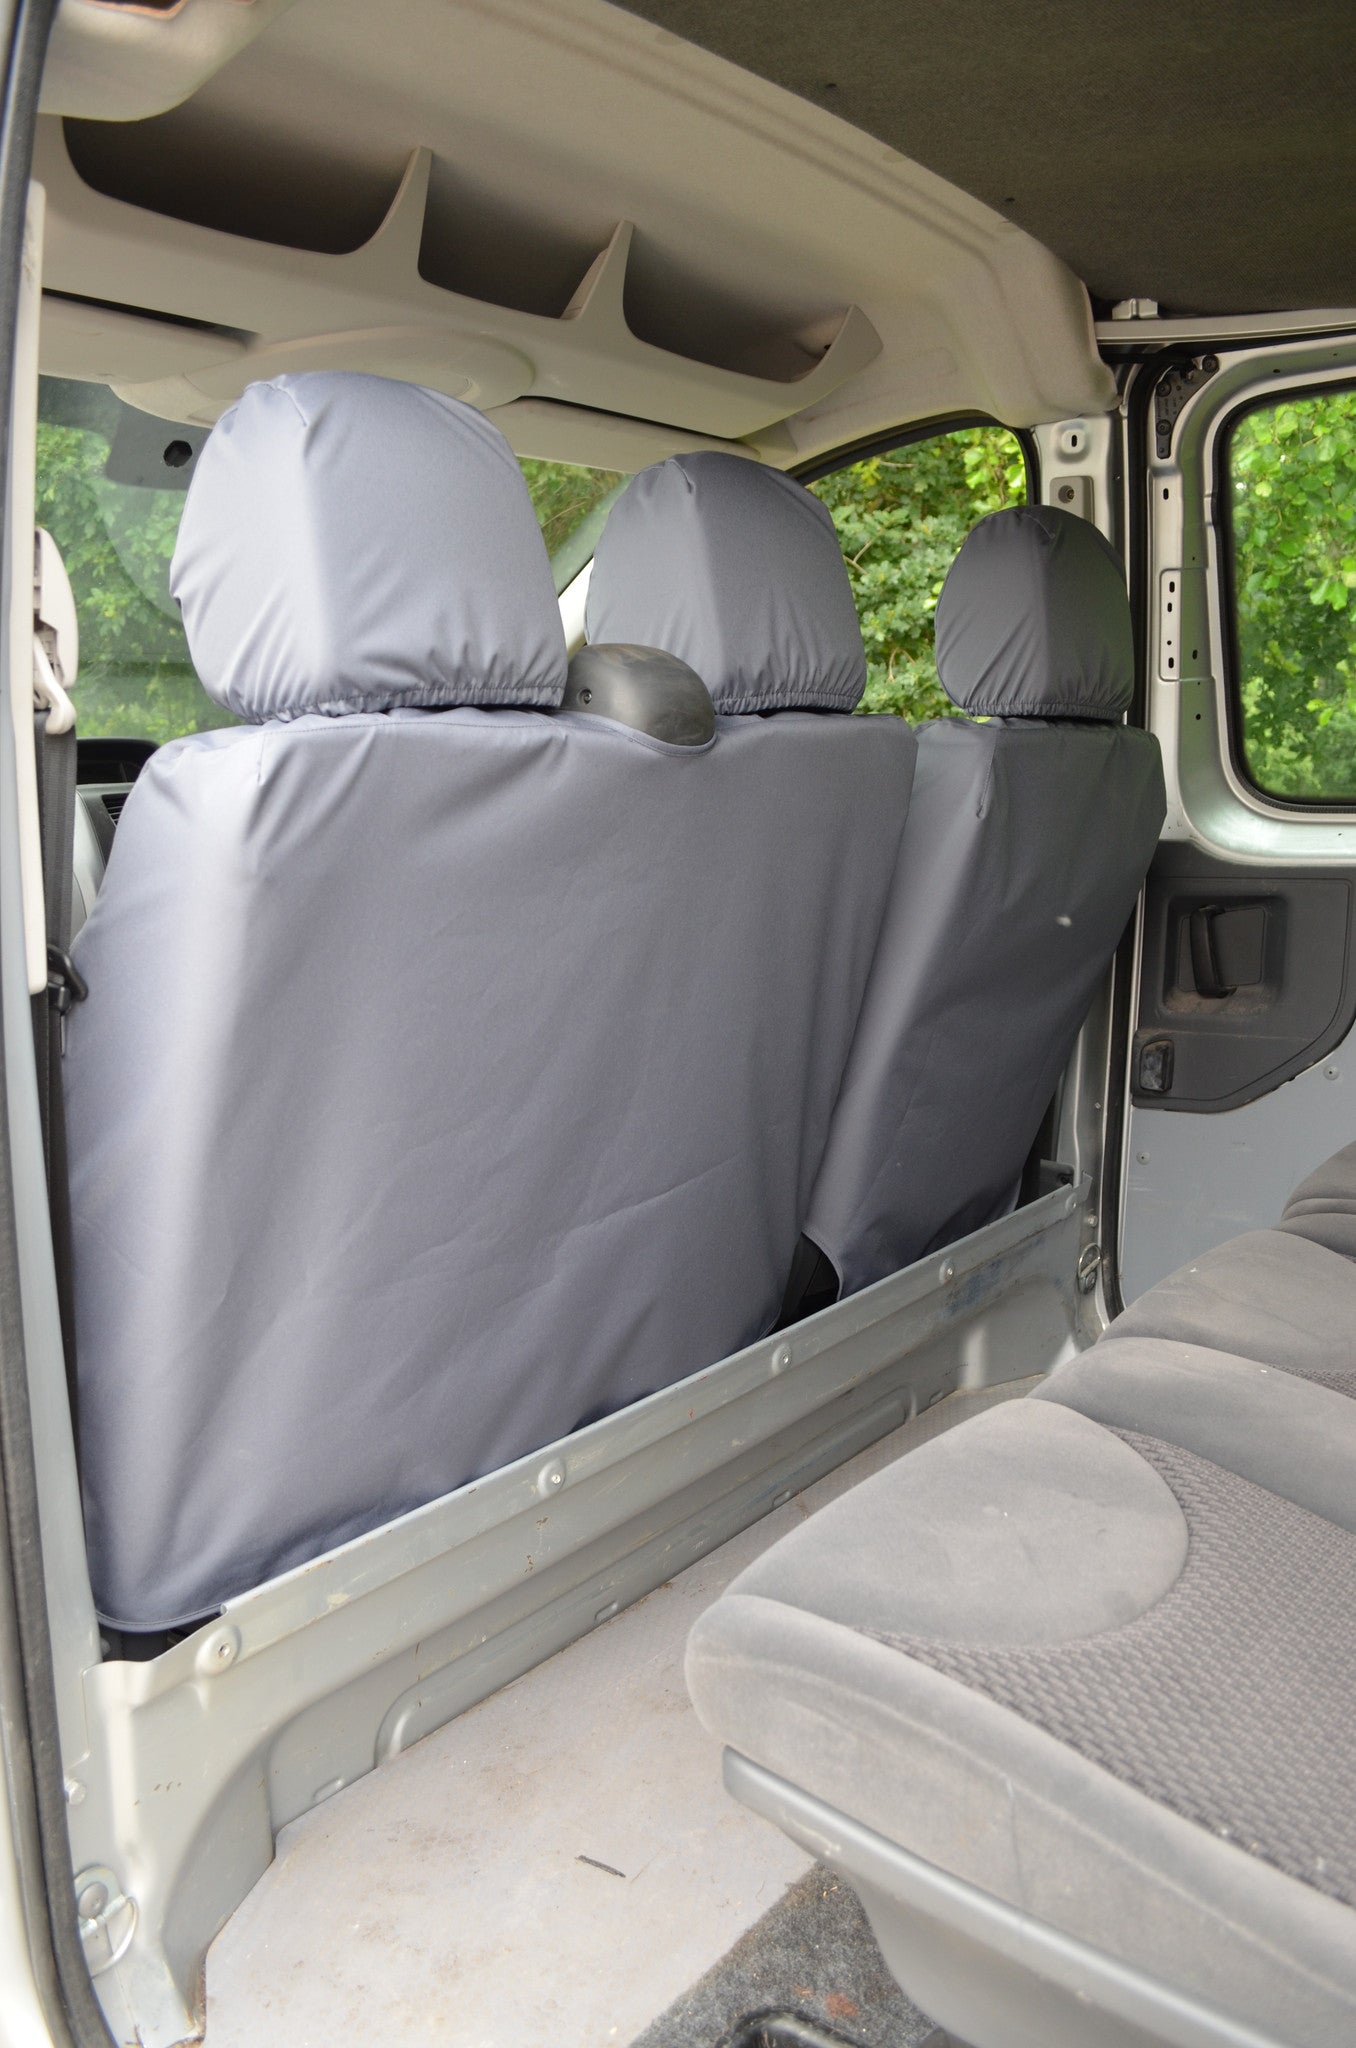 Citroen Dispatch 2007 - 2016 Tailored Front Seat Covers  Turtle Covers Ltd